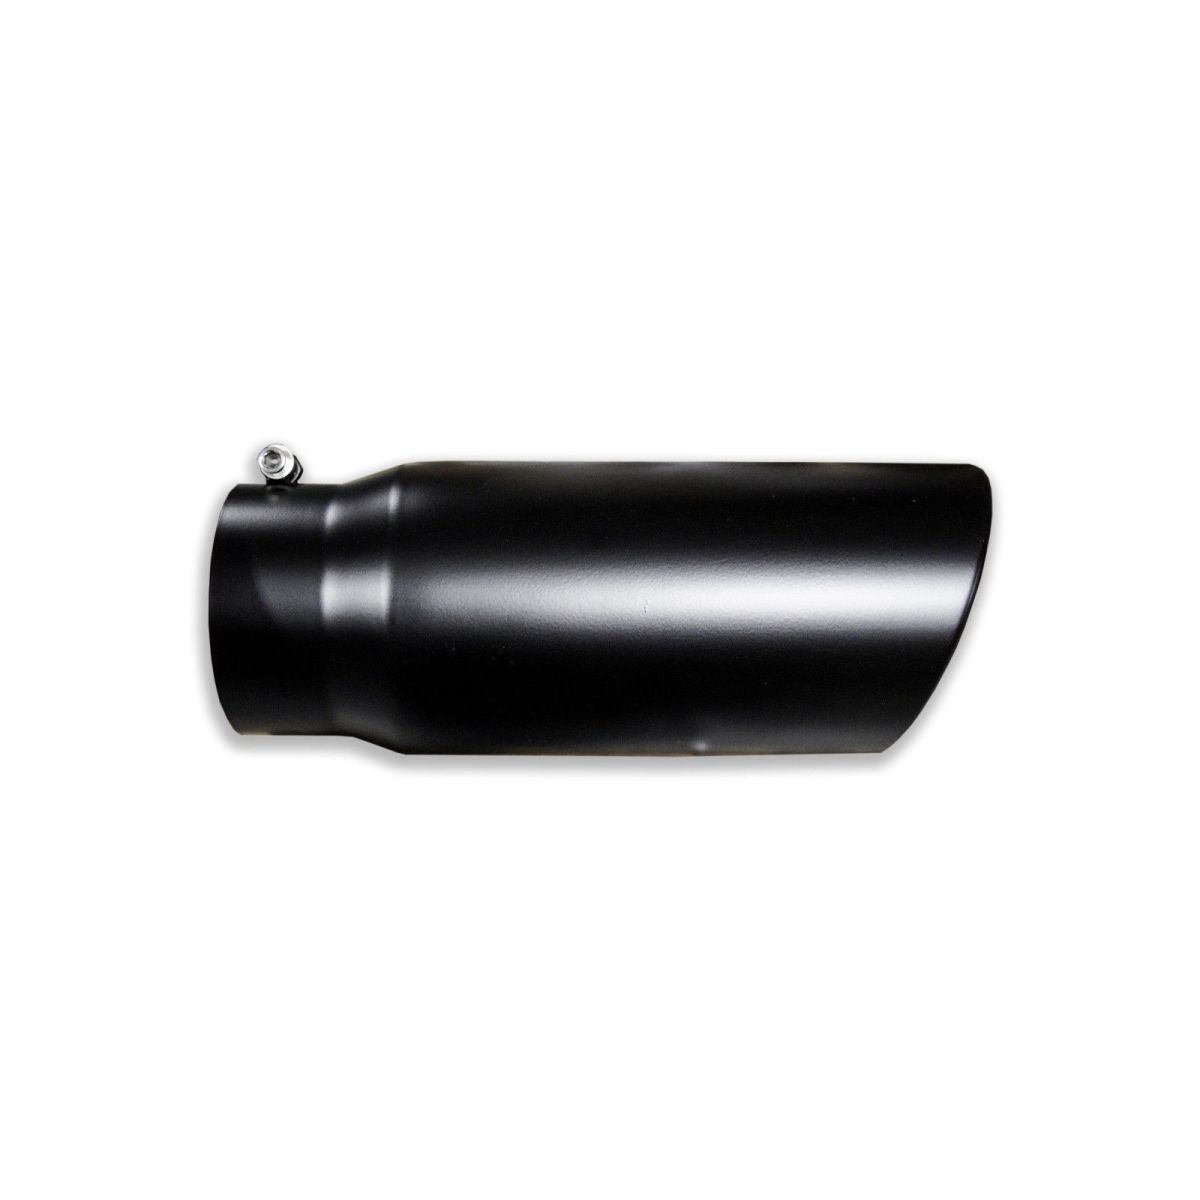 Rudy's Performance Parts - Rudy's 5x6x15 Black Stainless Steel Bolt-On Exhaust Tip